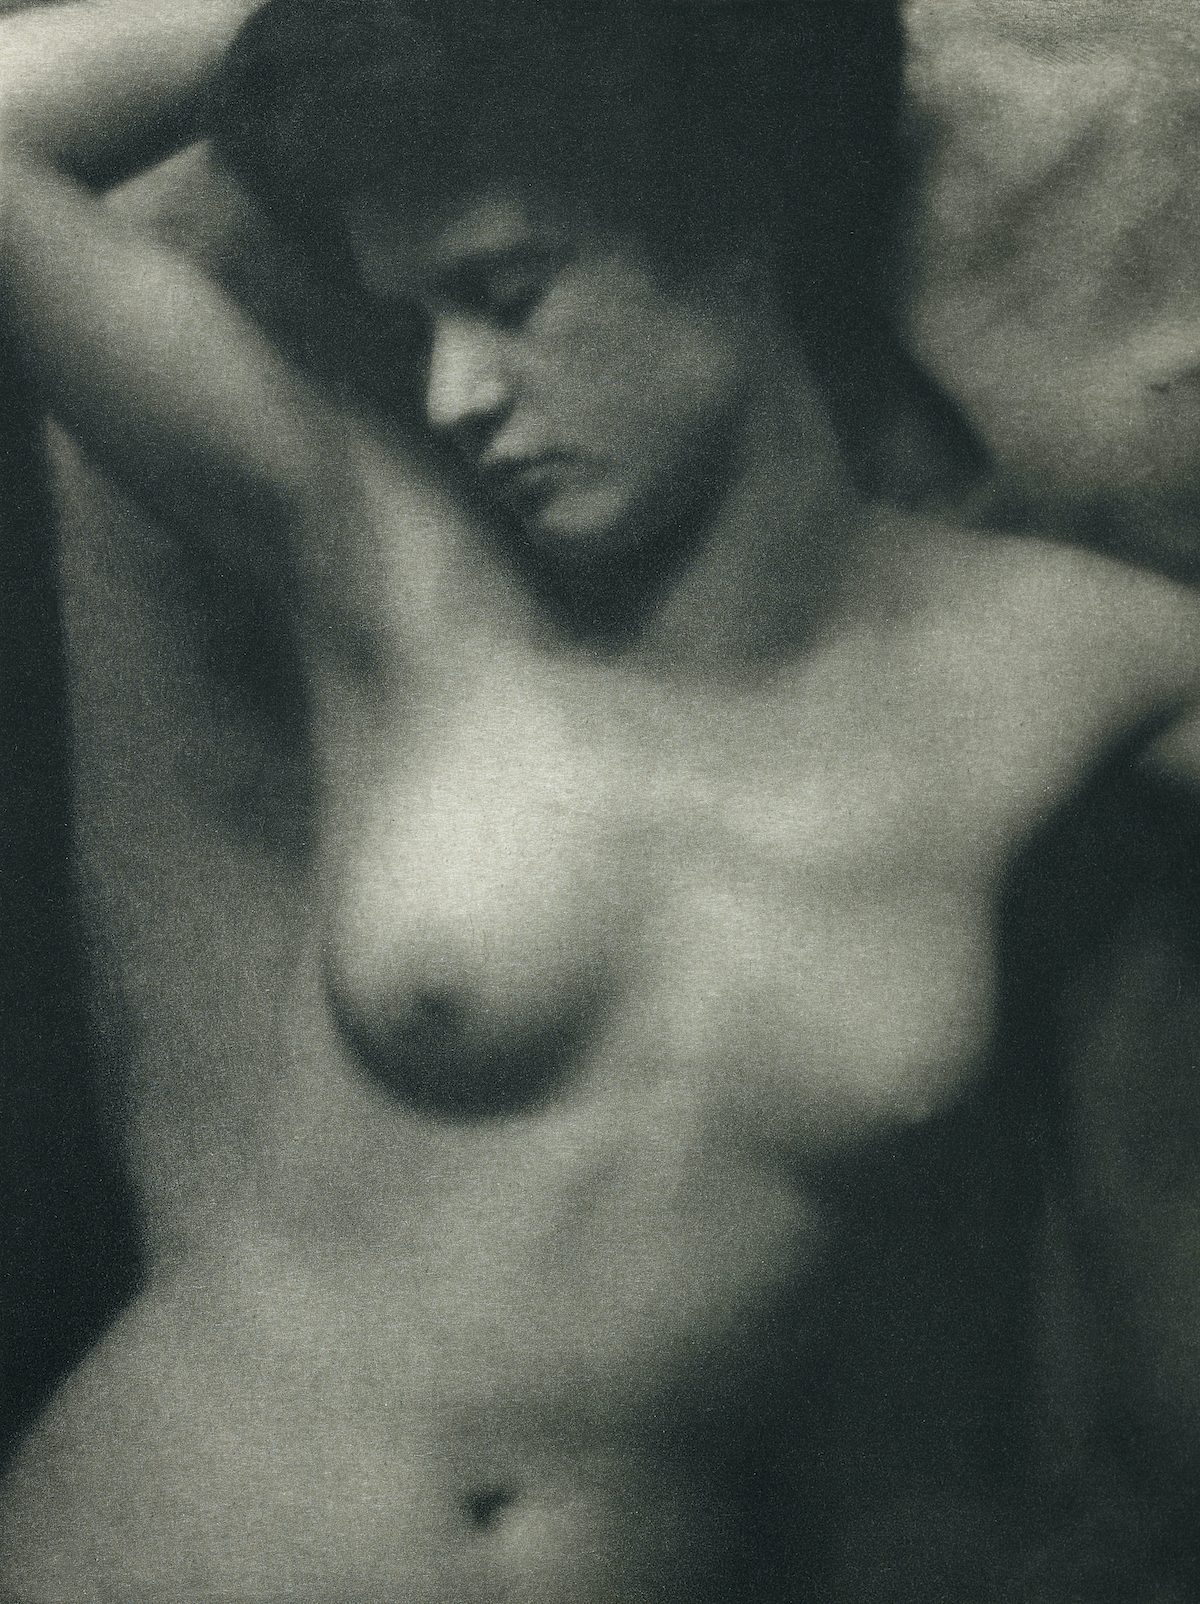 Torso during 20th century photo in high resolution by Alfred Stieglitz - the Minneapolis Institute of Art. 